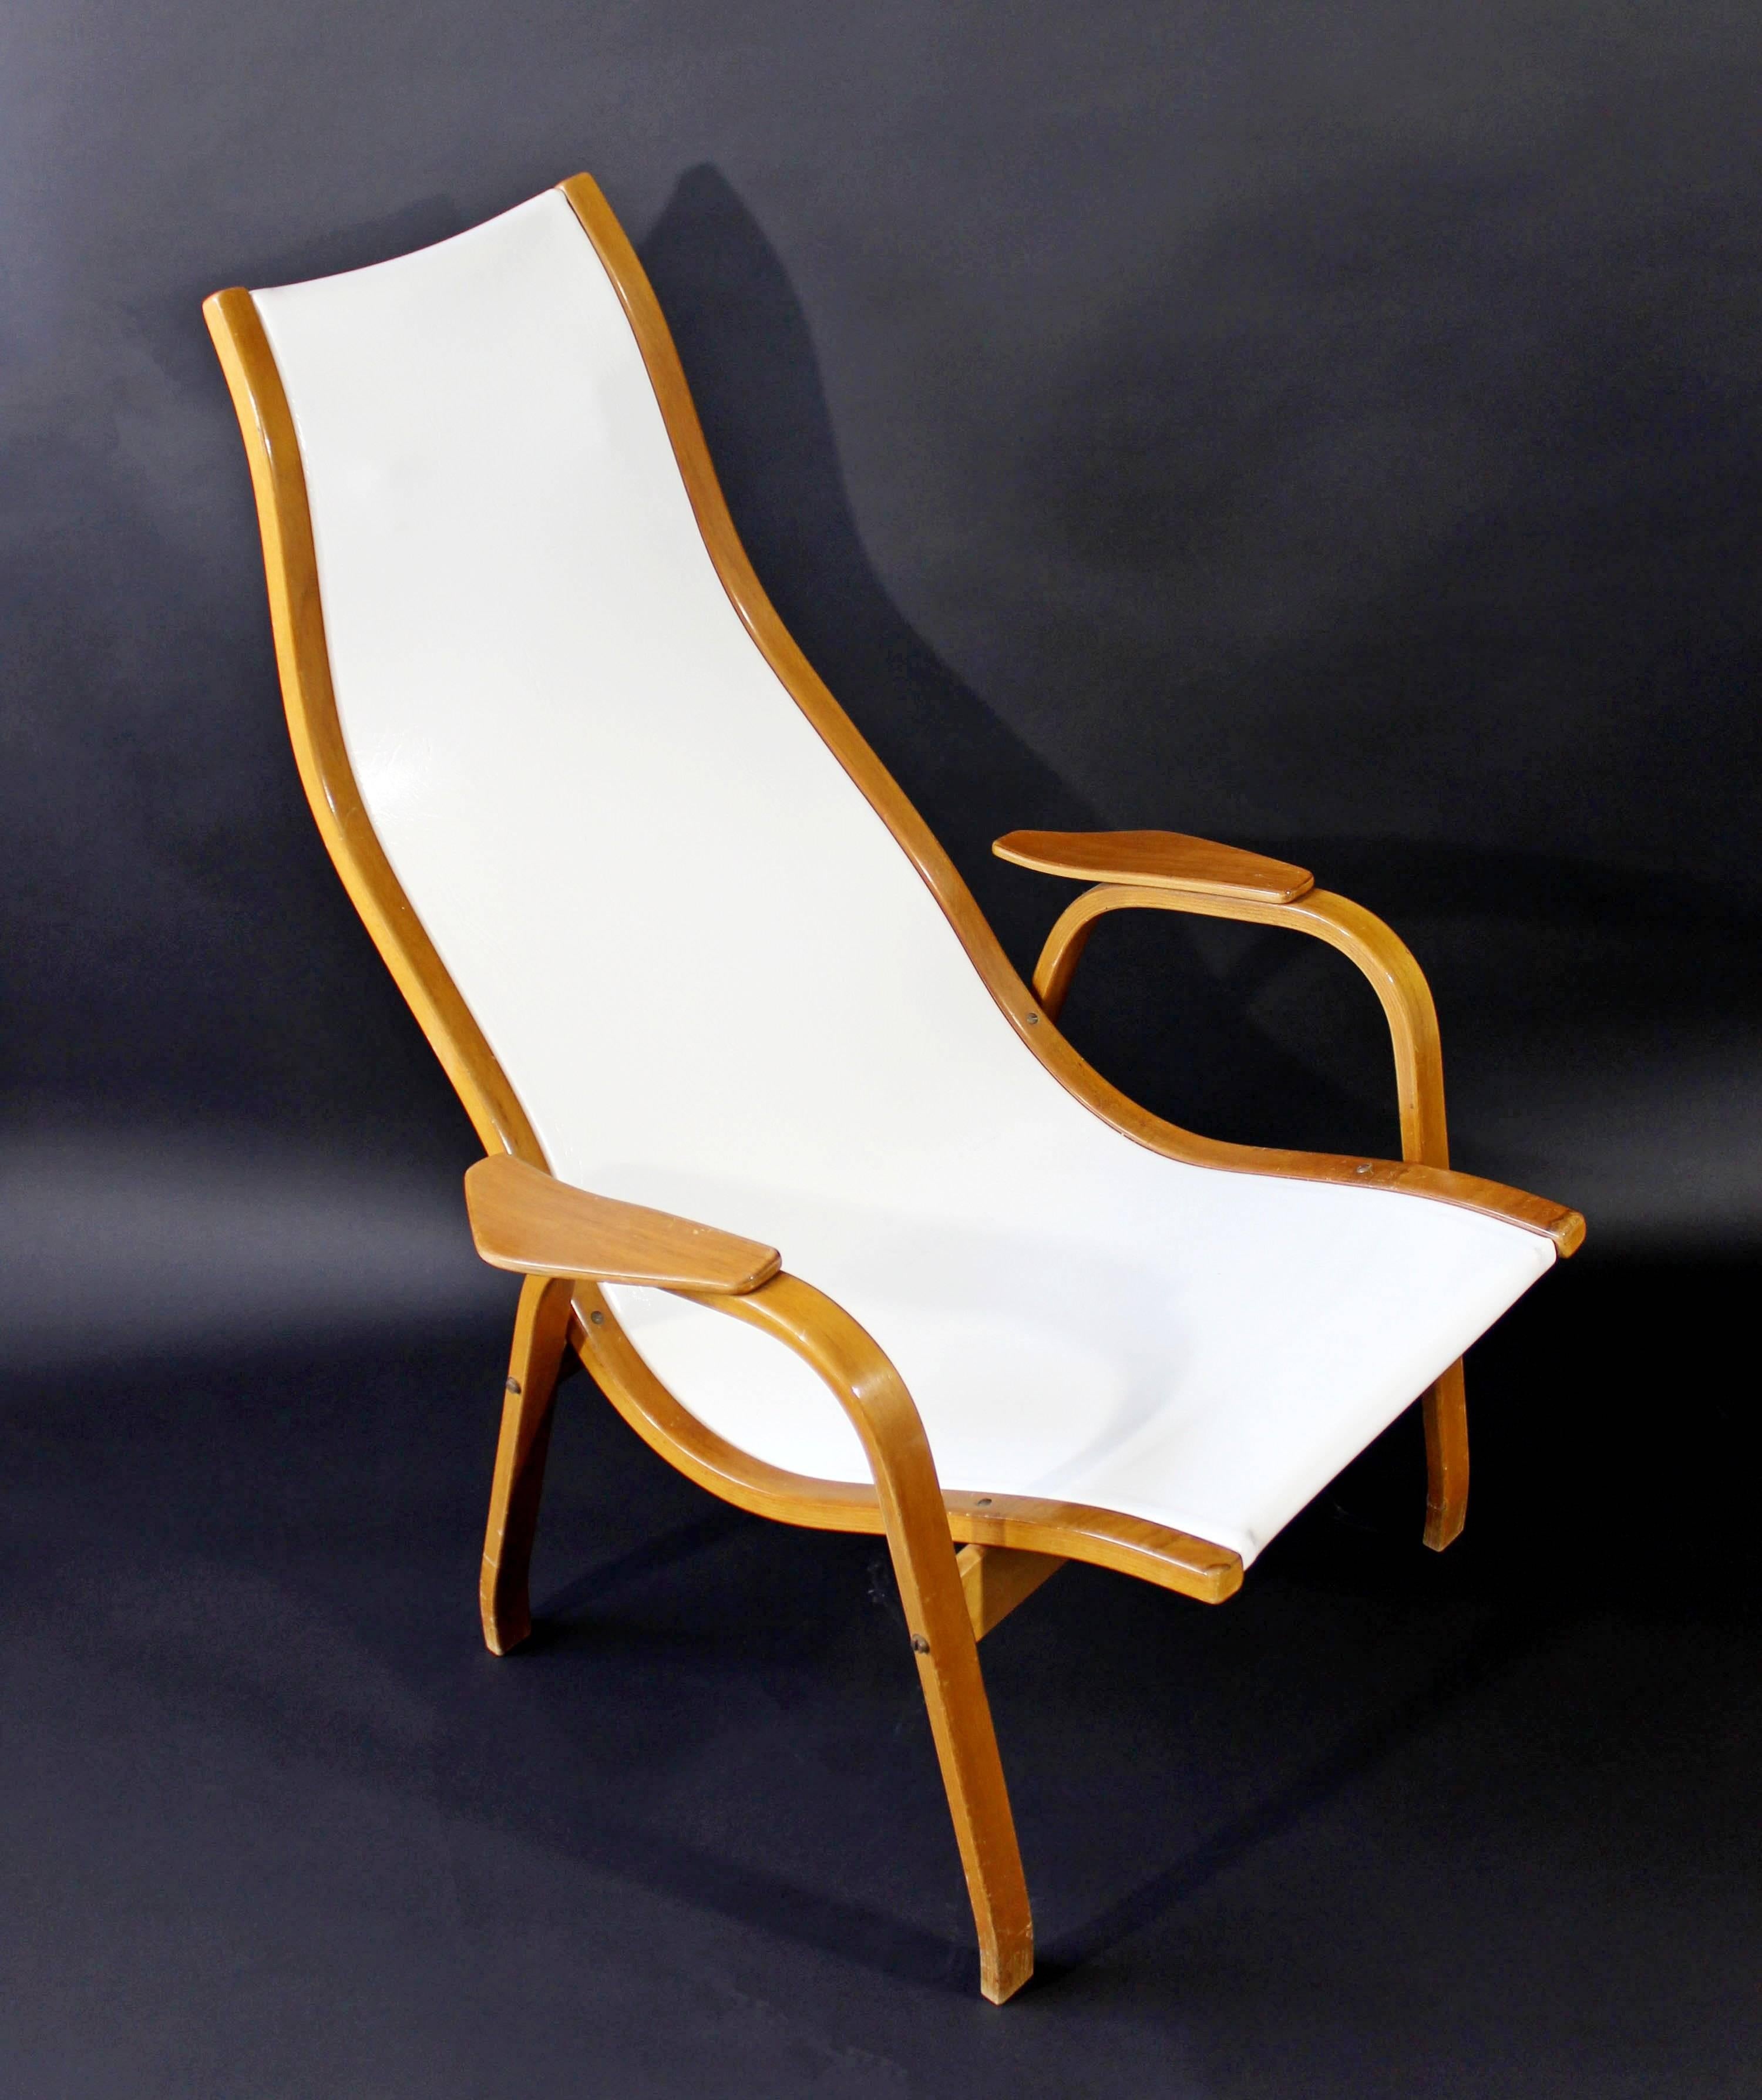 For your consideration is a fabulous, white vinyl upholstered, 